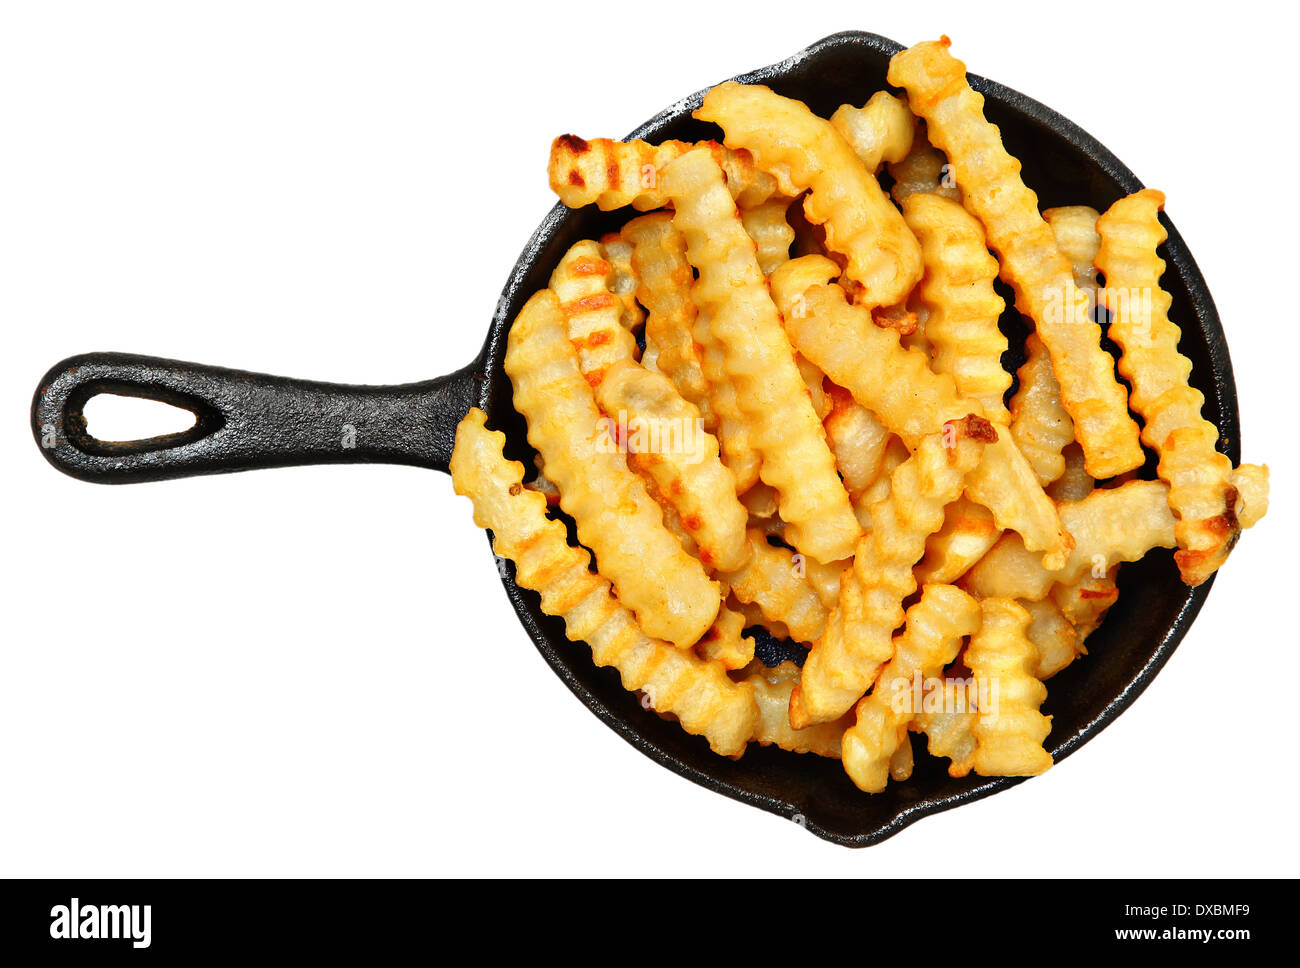 Oven Baked Crinkle Fries in Cast Iron Skillet over white. Stock Photo